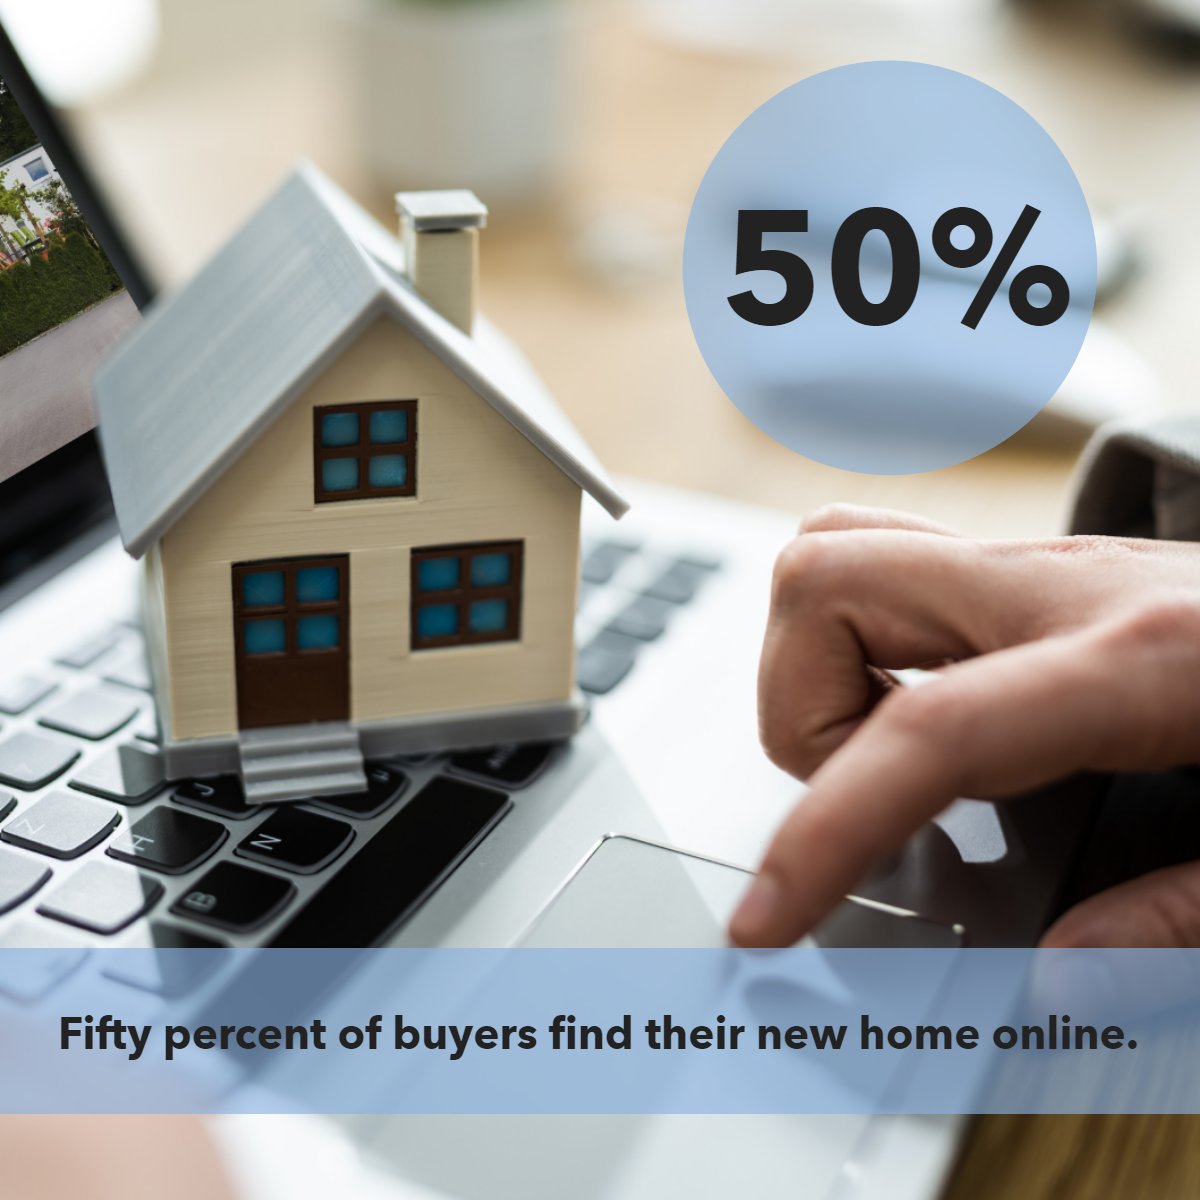 And I am pretty sure this number will only go up in the future! 📈

#funfacts #online #buyers #buyingonline #homesearch #househunting
 #perdidokey #orangebeach #gulfshores #pensacola #gulf #pensacolabeach #navarre